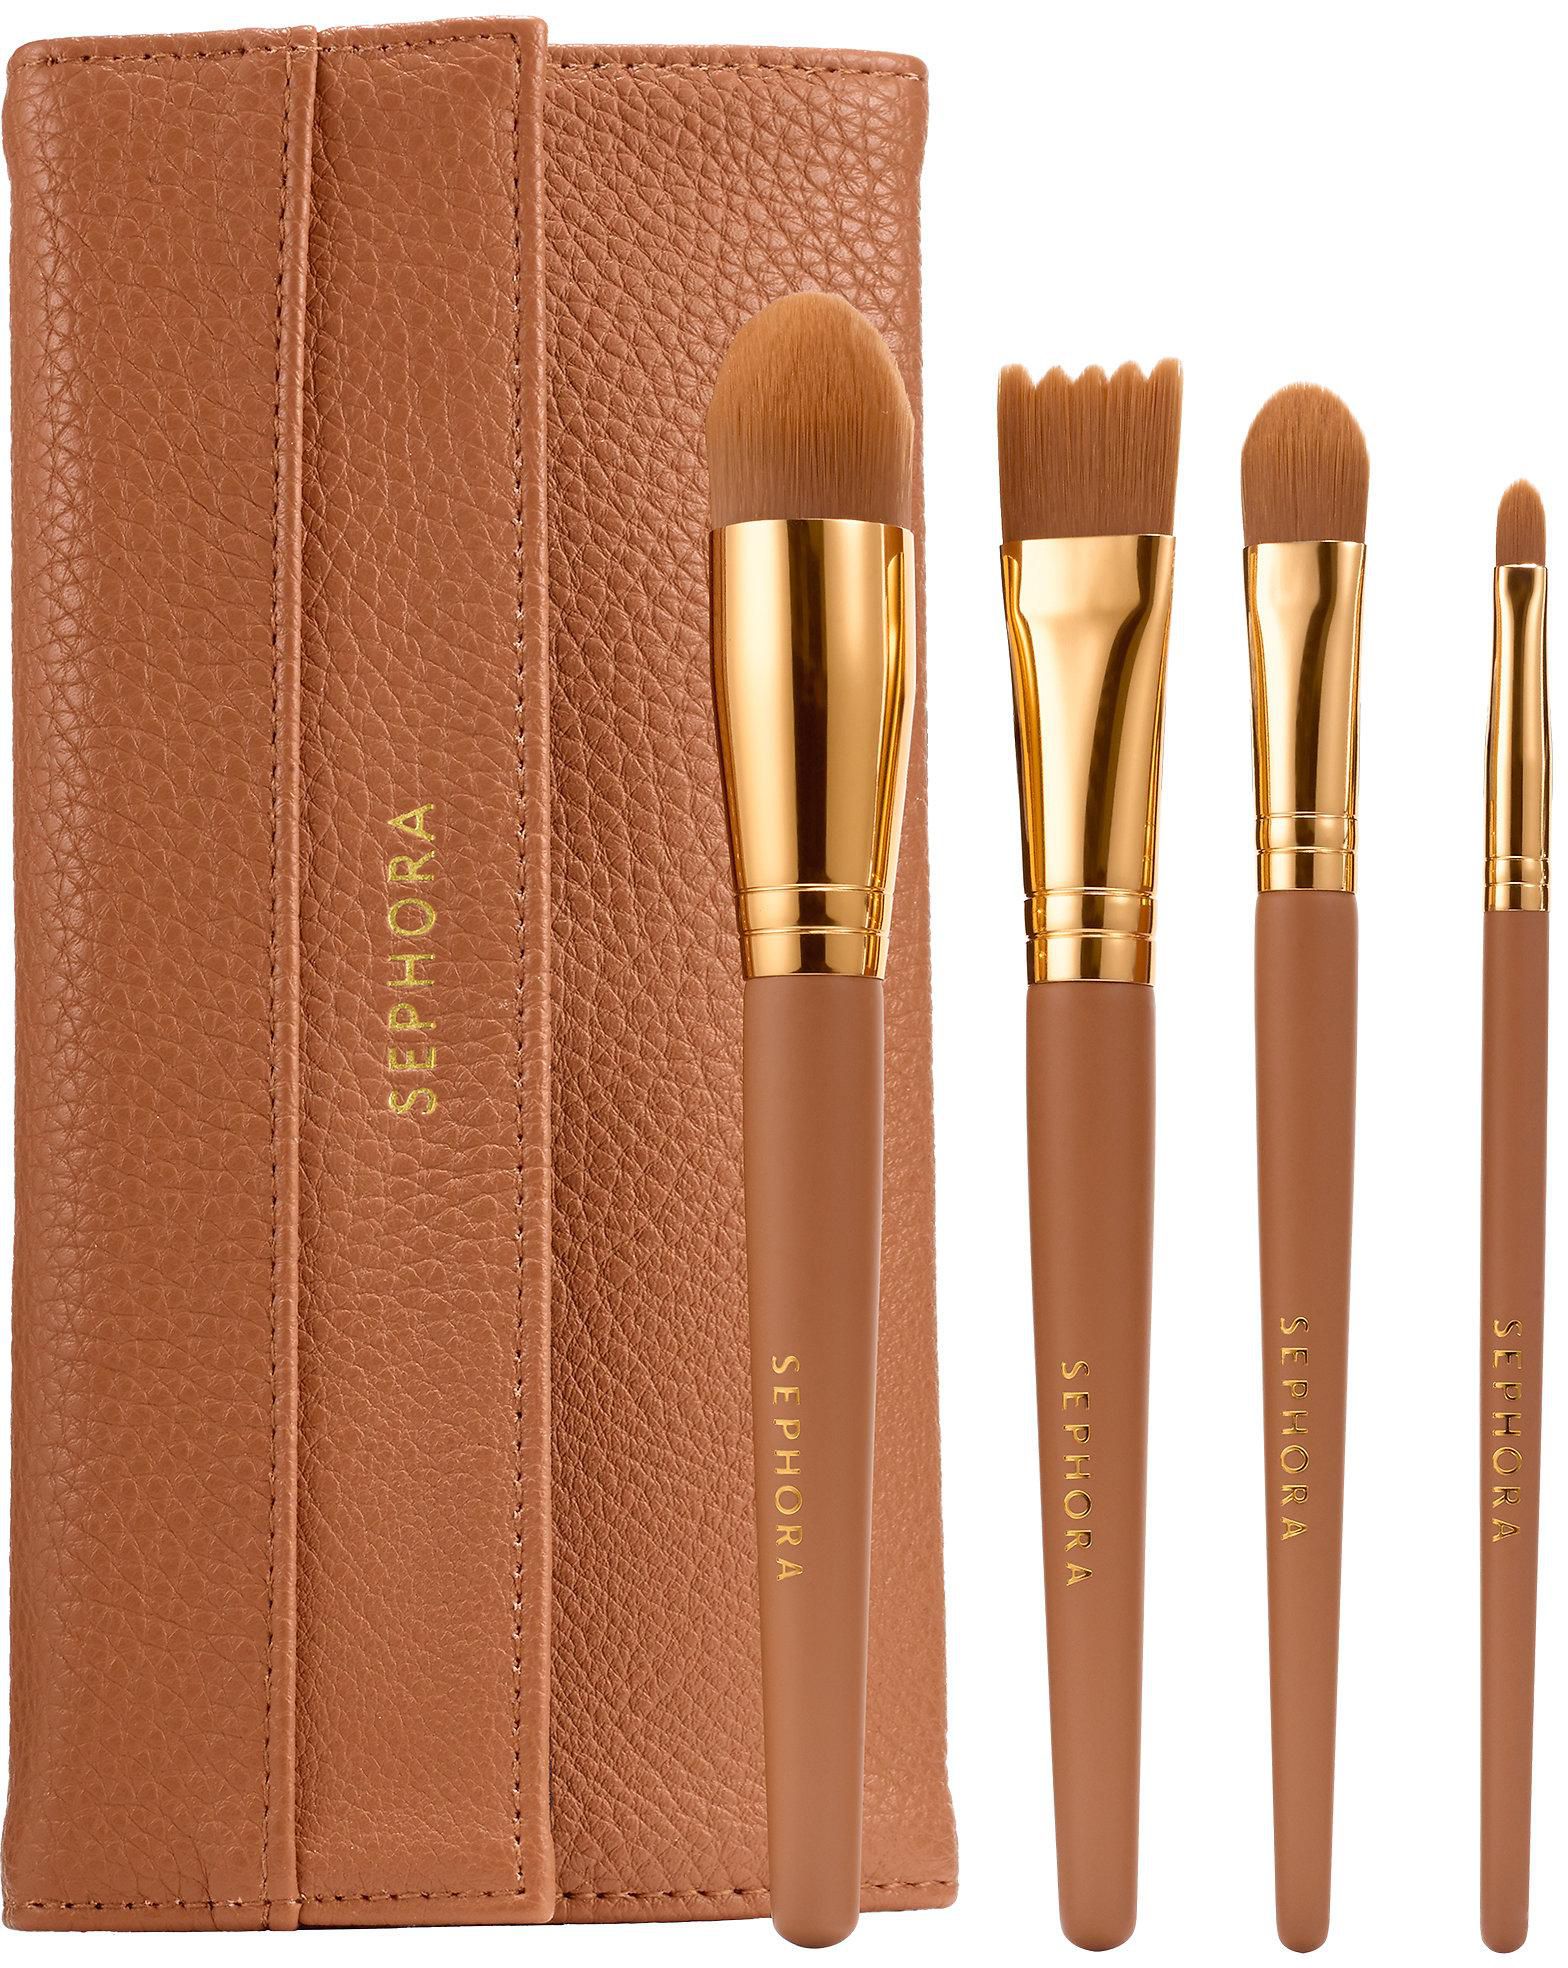 Sephora Women's 4 piece Synthetic Soft Complexion Make Up Brush Set With Rose Gold Pouch